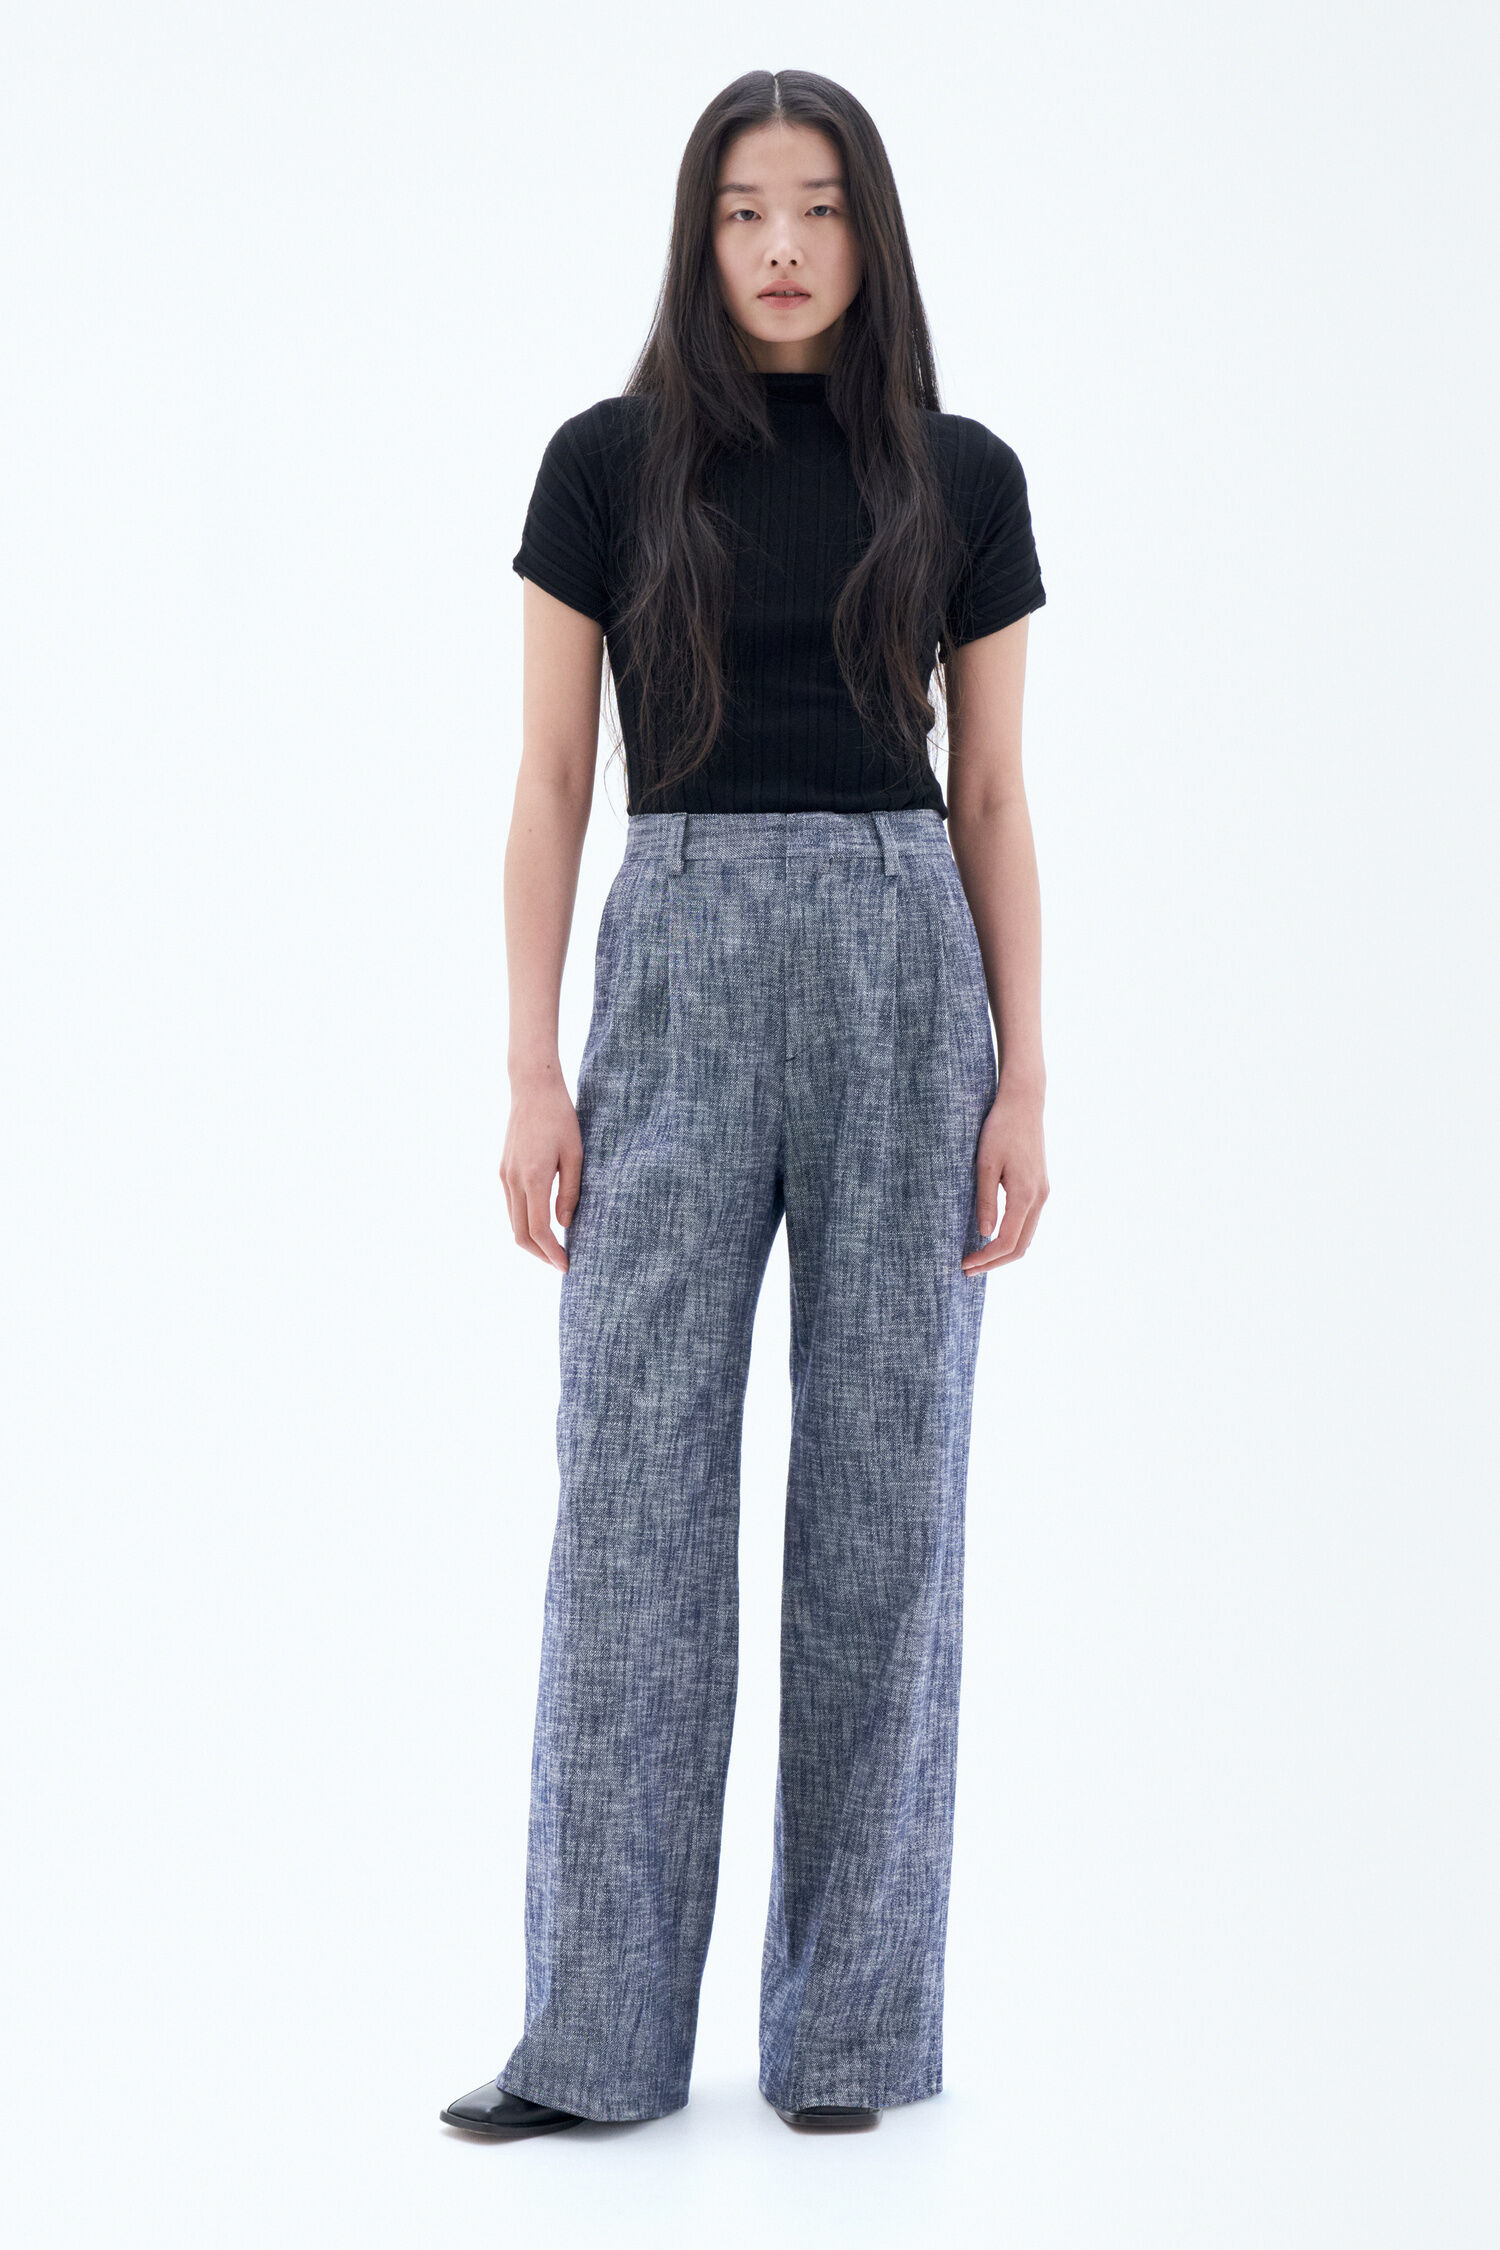 Darcey Textured Trousers